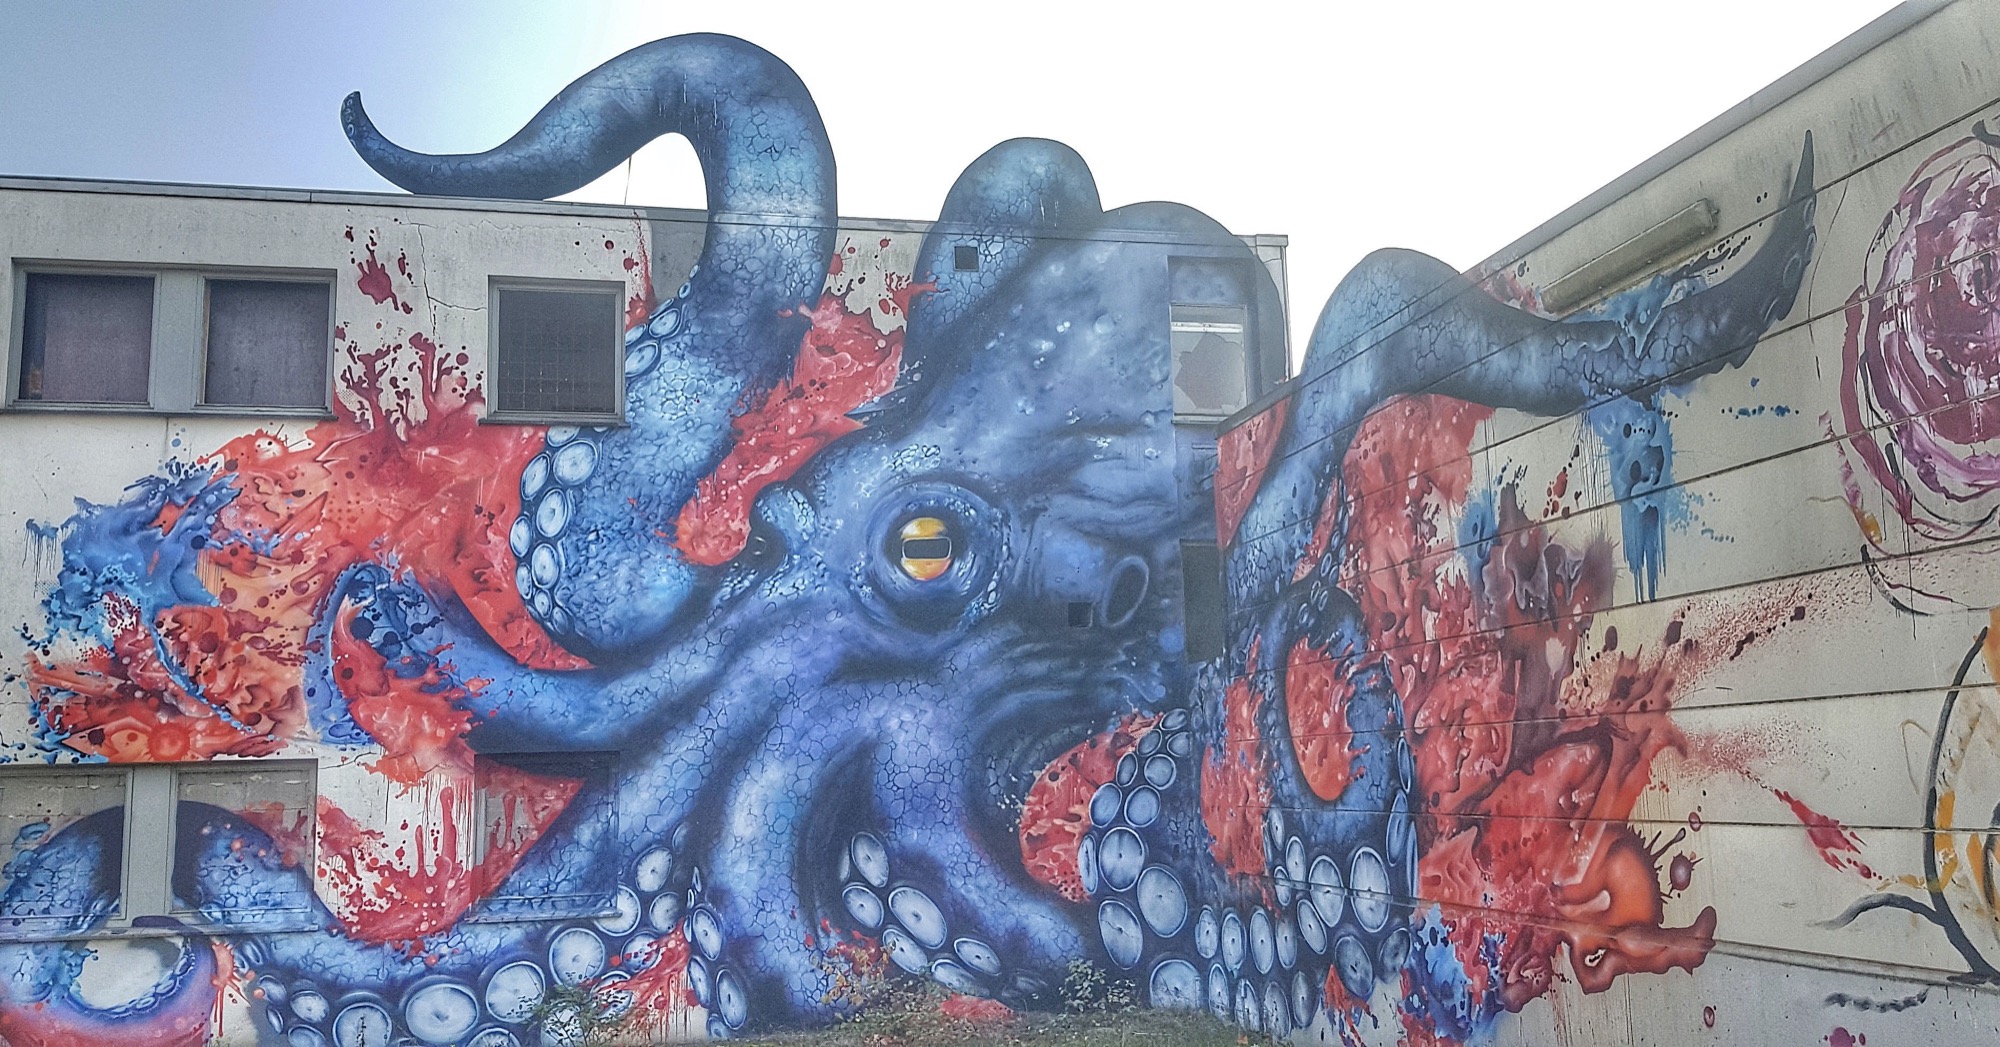 Graffiti 502 Octopuss captured by Cure_for_the_mind in Esch/Alzette Luxembourg